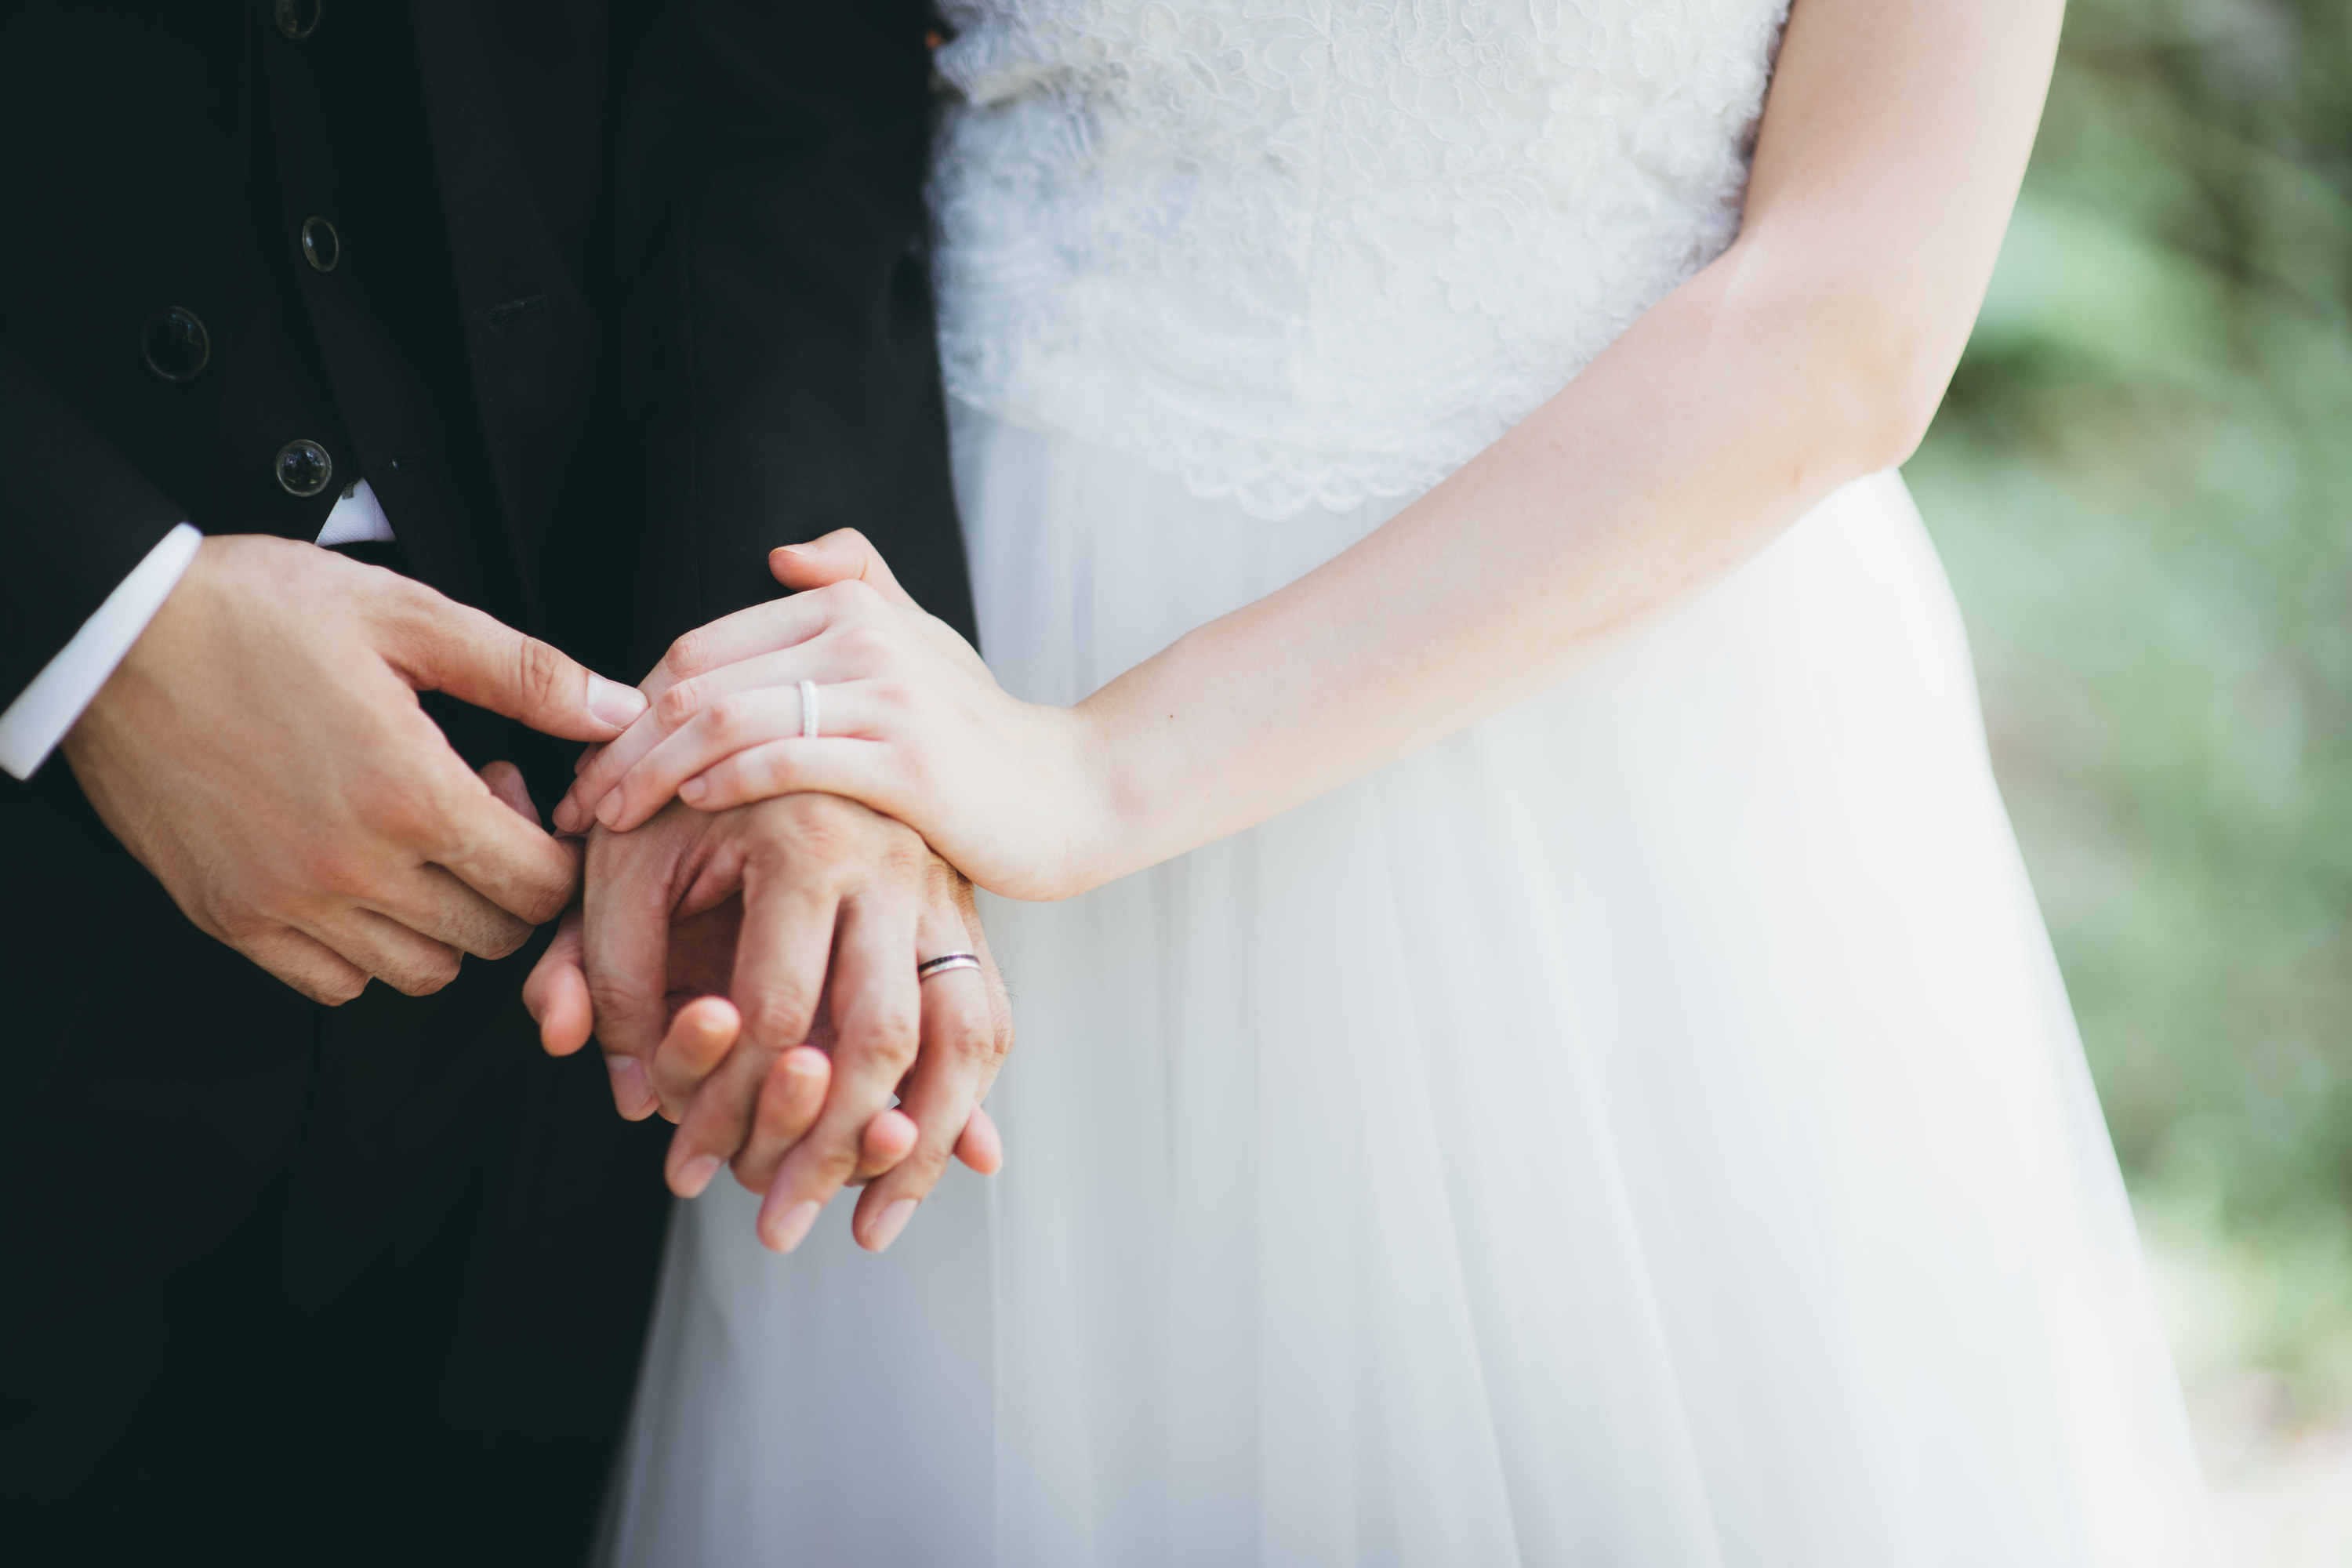 Close-up of a couple holding hands with wedding rings